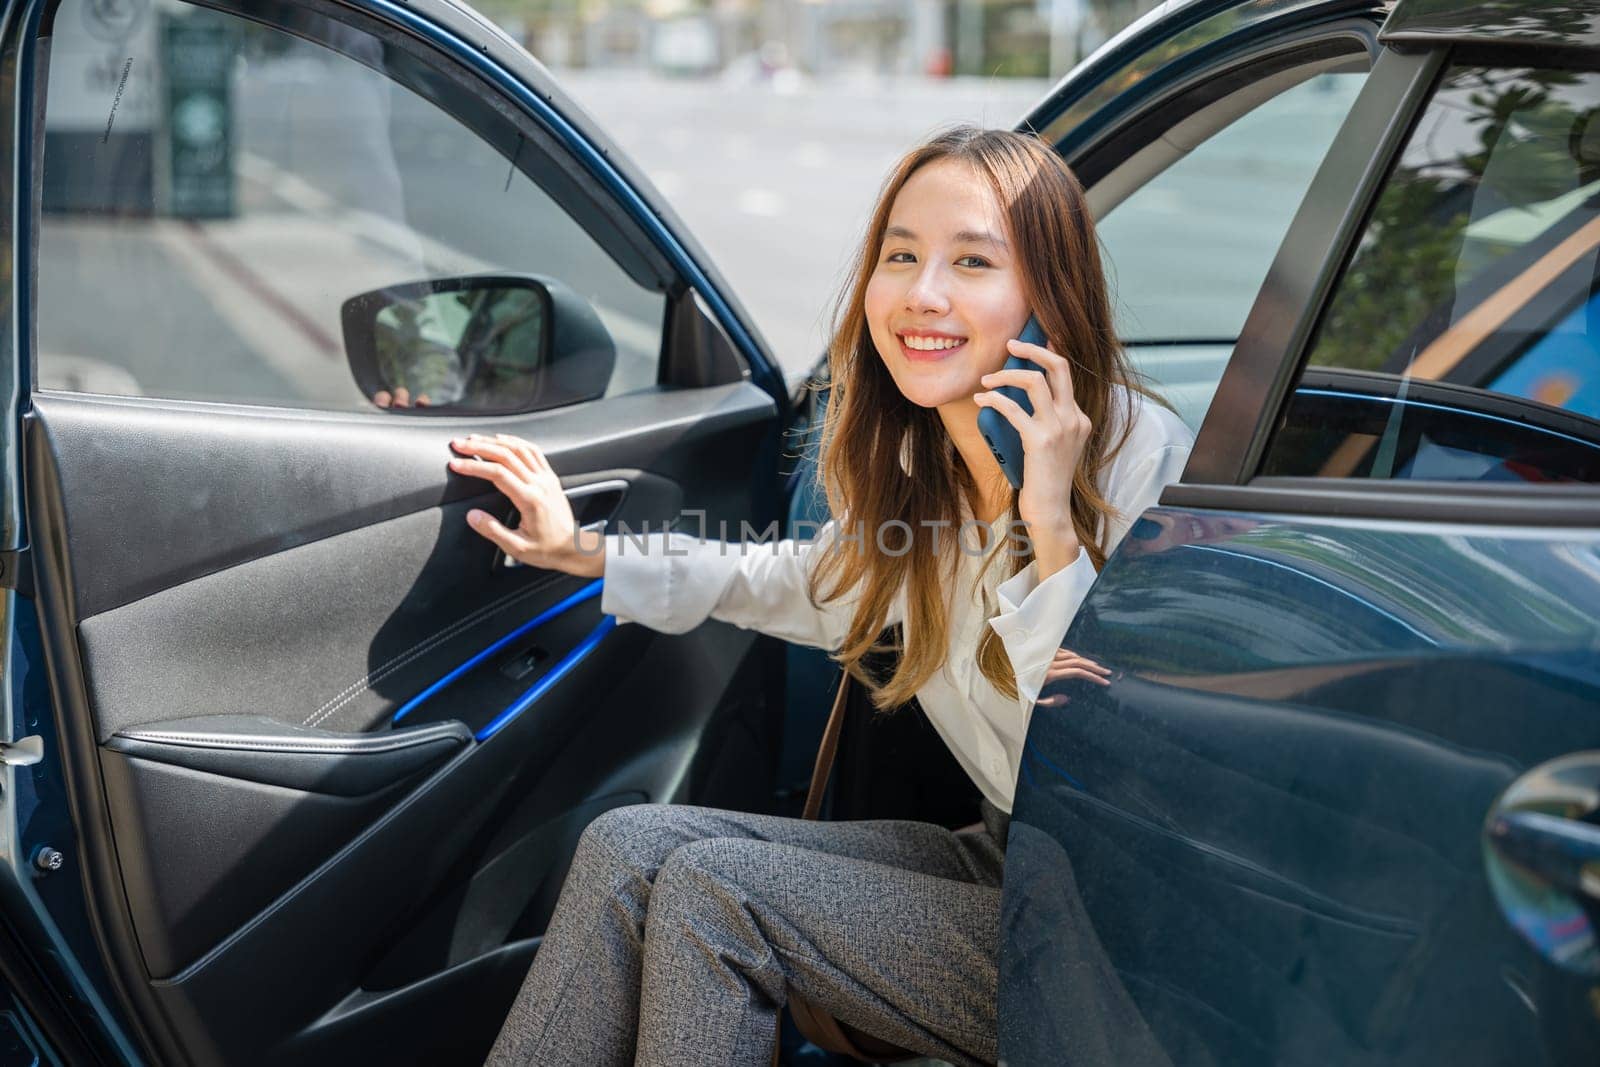 An Asian businesswoman, seated in her luxury car, smiles as she gets a new contract over the phone. Her open car door symbolizes the doorway to business success in the modern city. by Sorapop